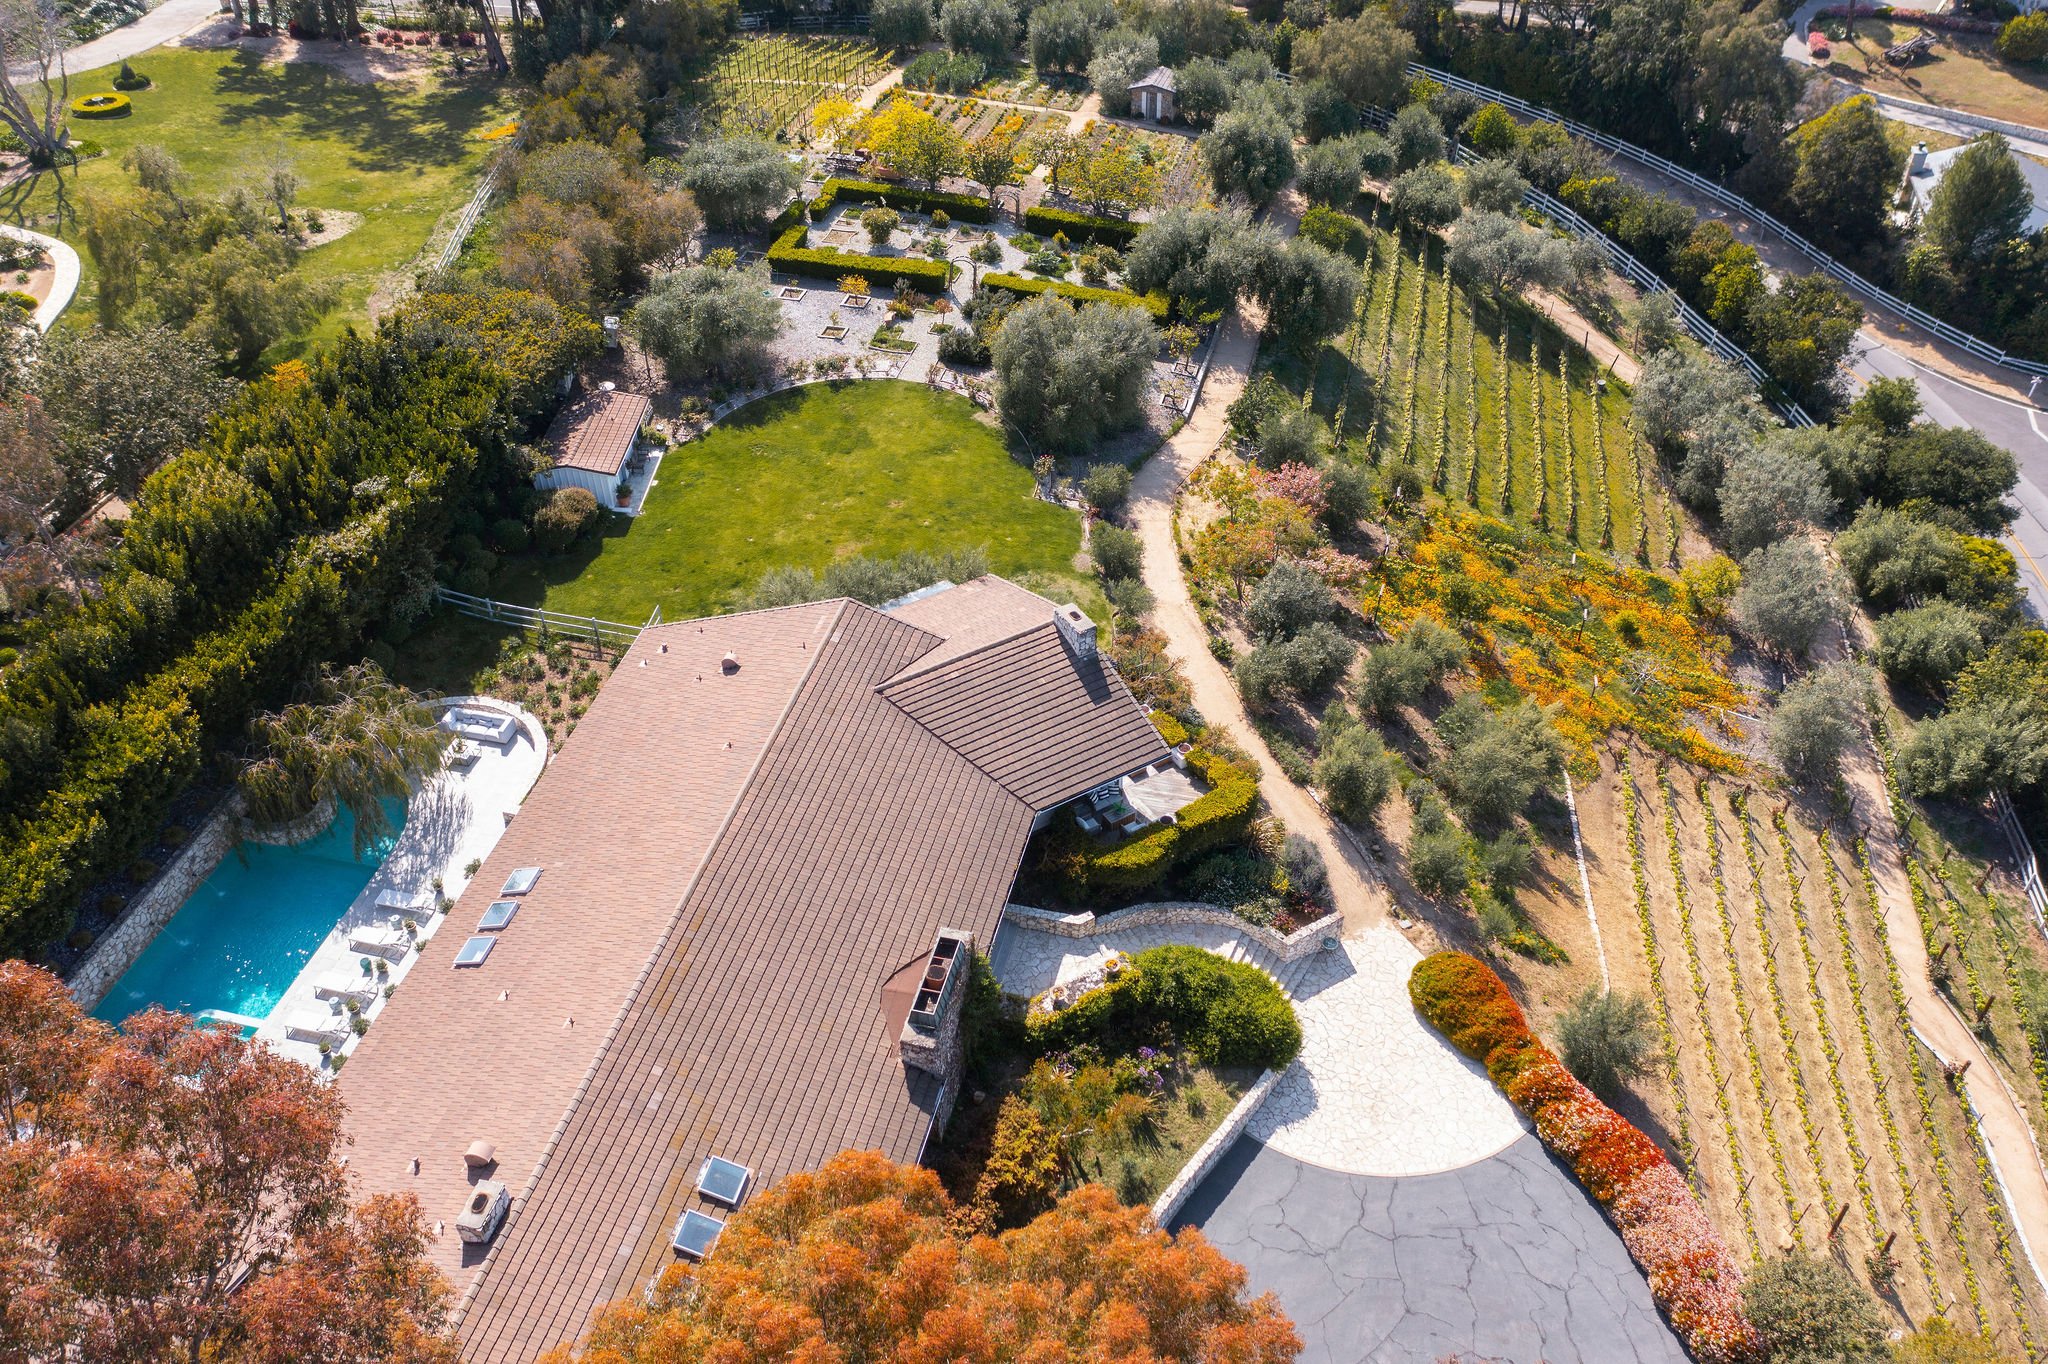 Francis York This Mid-Century Ranch with Award-Winning Vineyards is a ‘House of Dreams’ in Palos Verdes, California 11.jpg